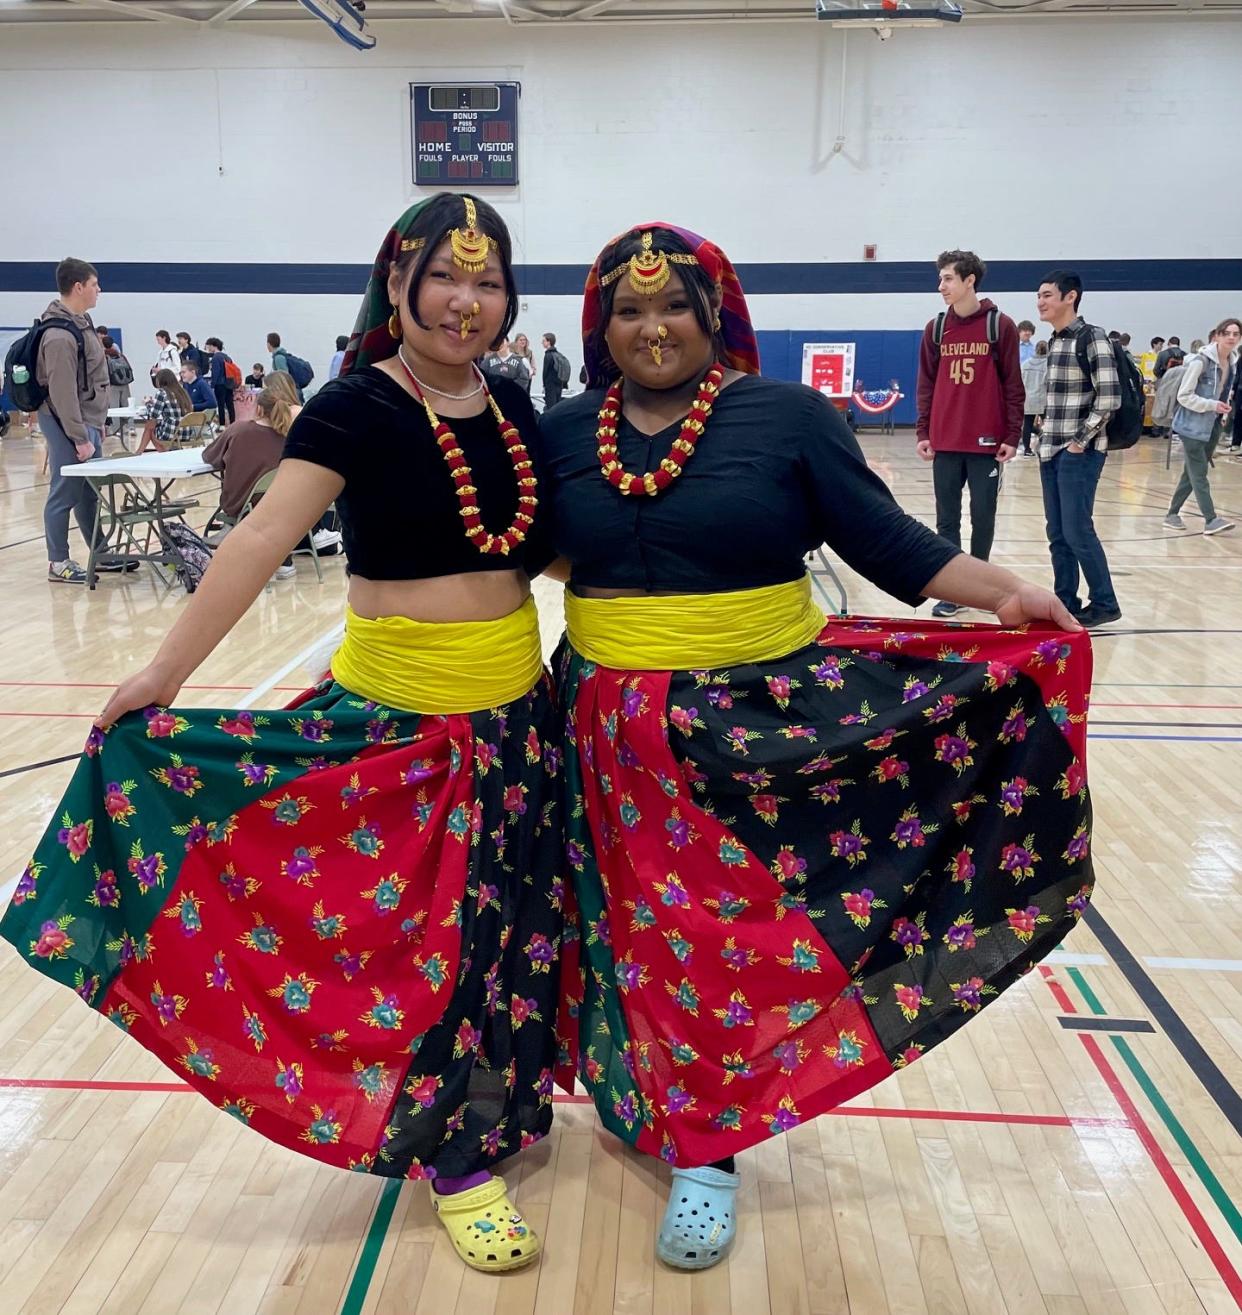 Dances performed by Nepali students from Akron Public Schools' North High School as part of an EIG project, the Kaleidoscope Cultural Fair at Hudson High School.